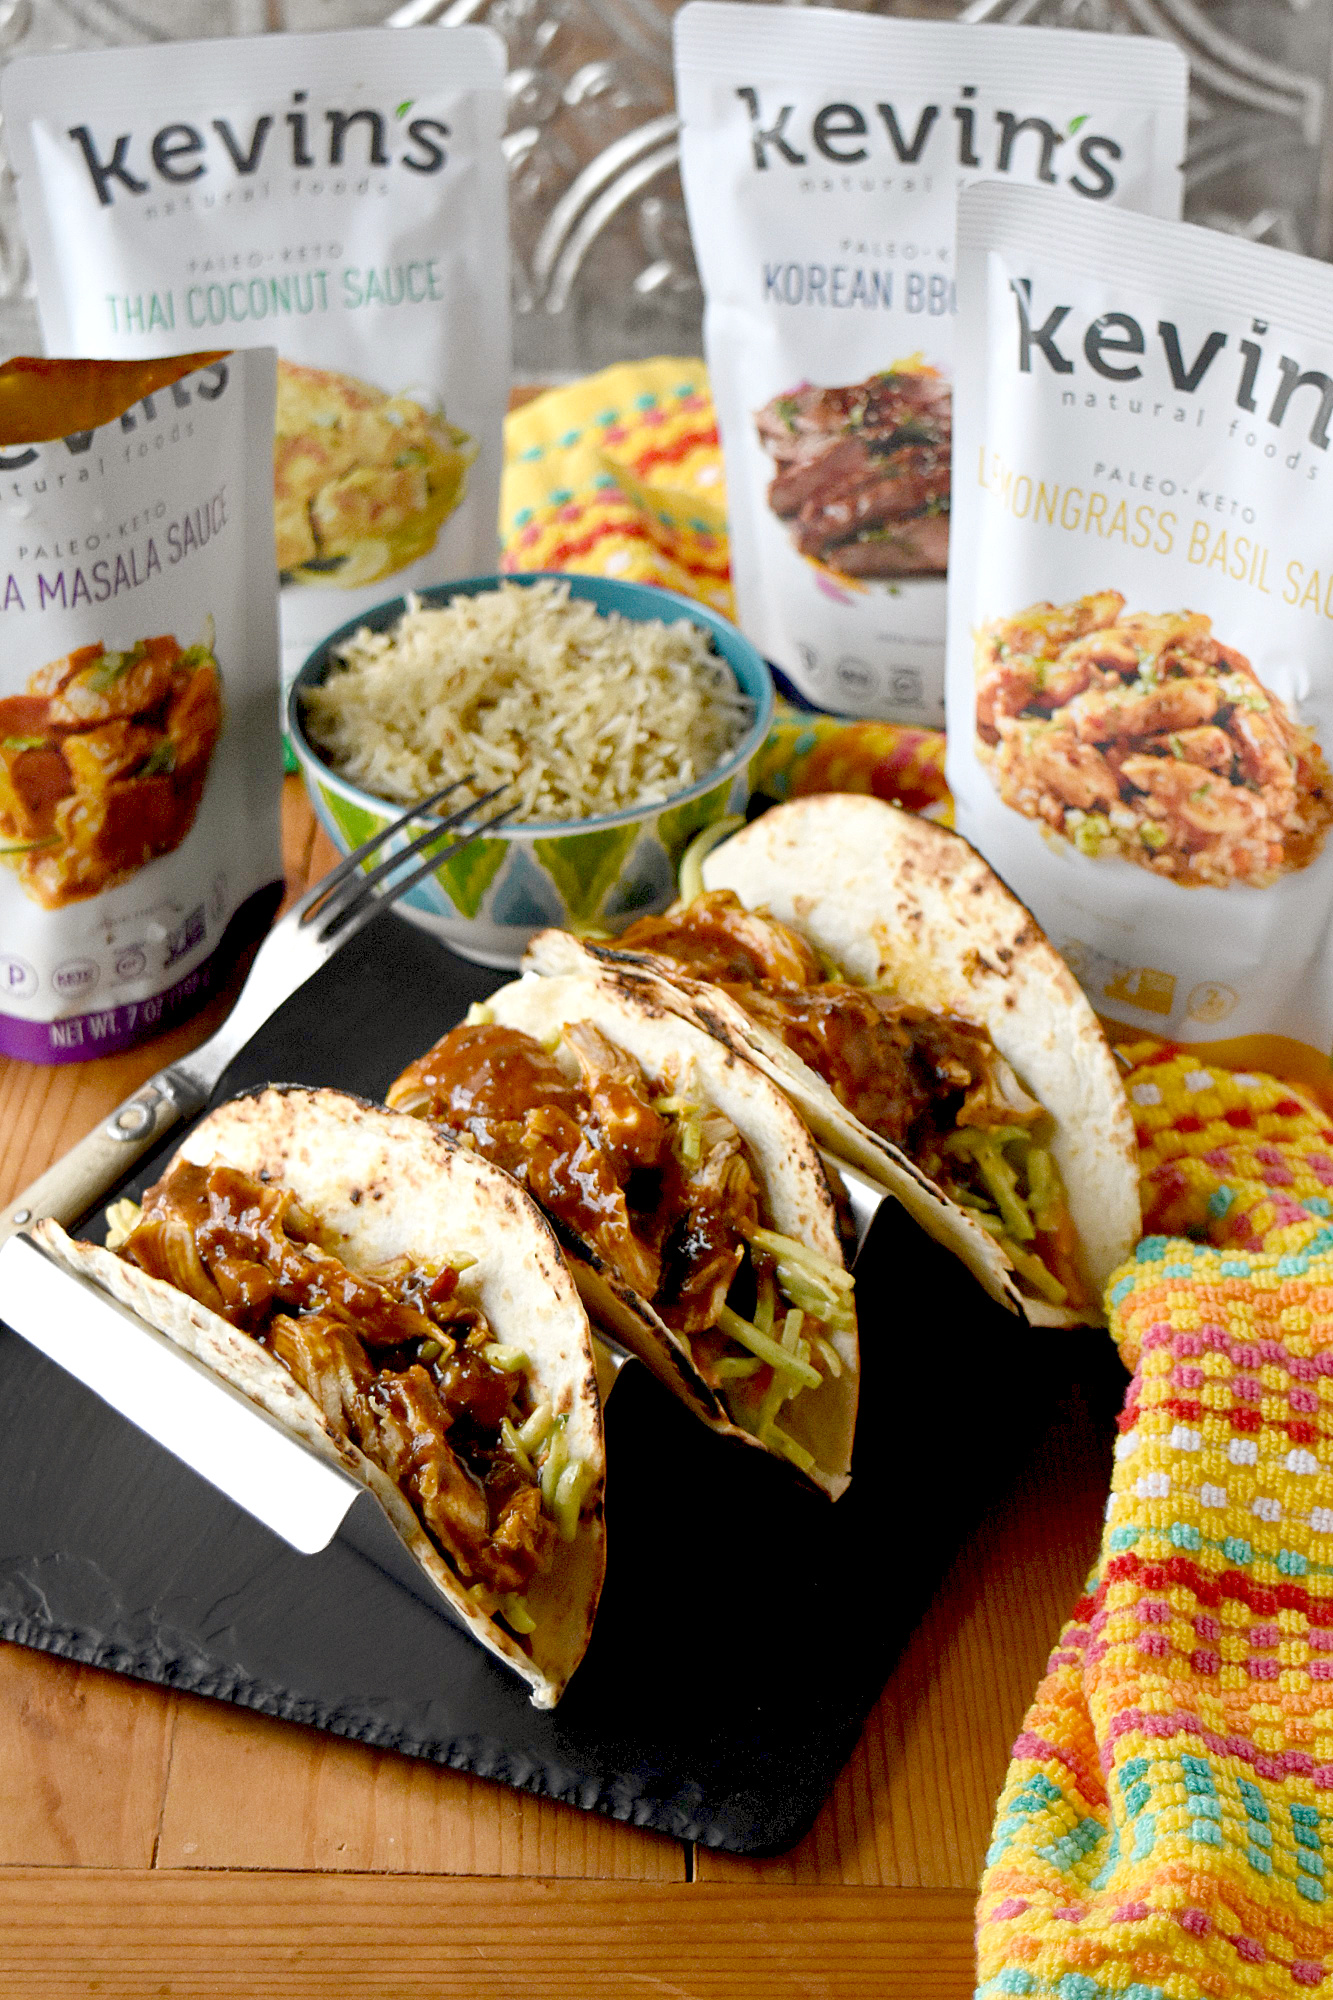 Chicken Tikka Masala Tacos taste amazing for a meal made in under 30 minutes. The chicken simmers in delicious tikka masala sauce and the slaw has extra crunch from the broccoli and peanuts.  #eatcleanlivehappy #kevinsnaturalfoods #kevinsrecipechallenge